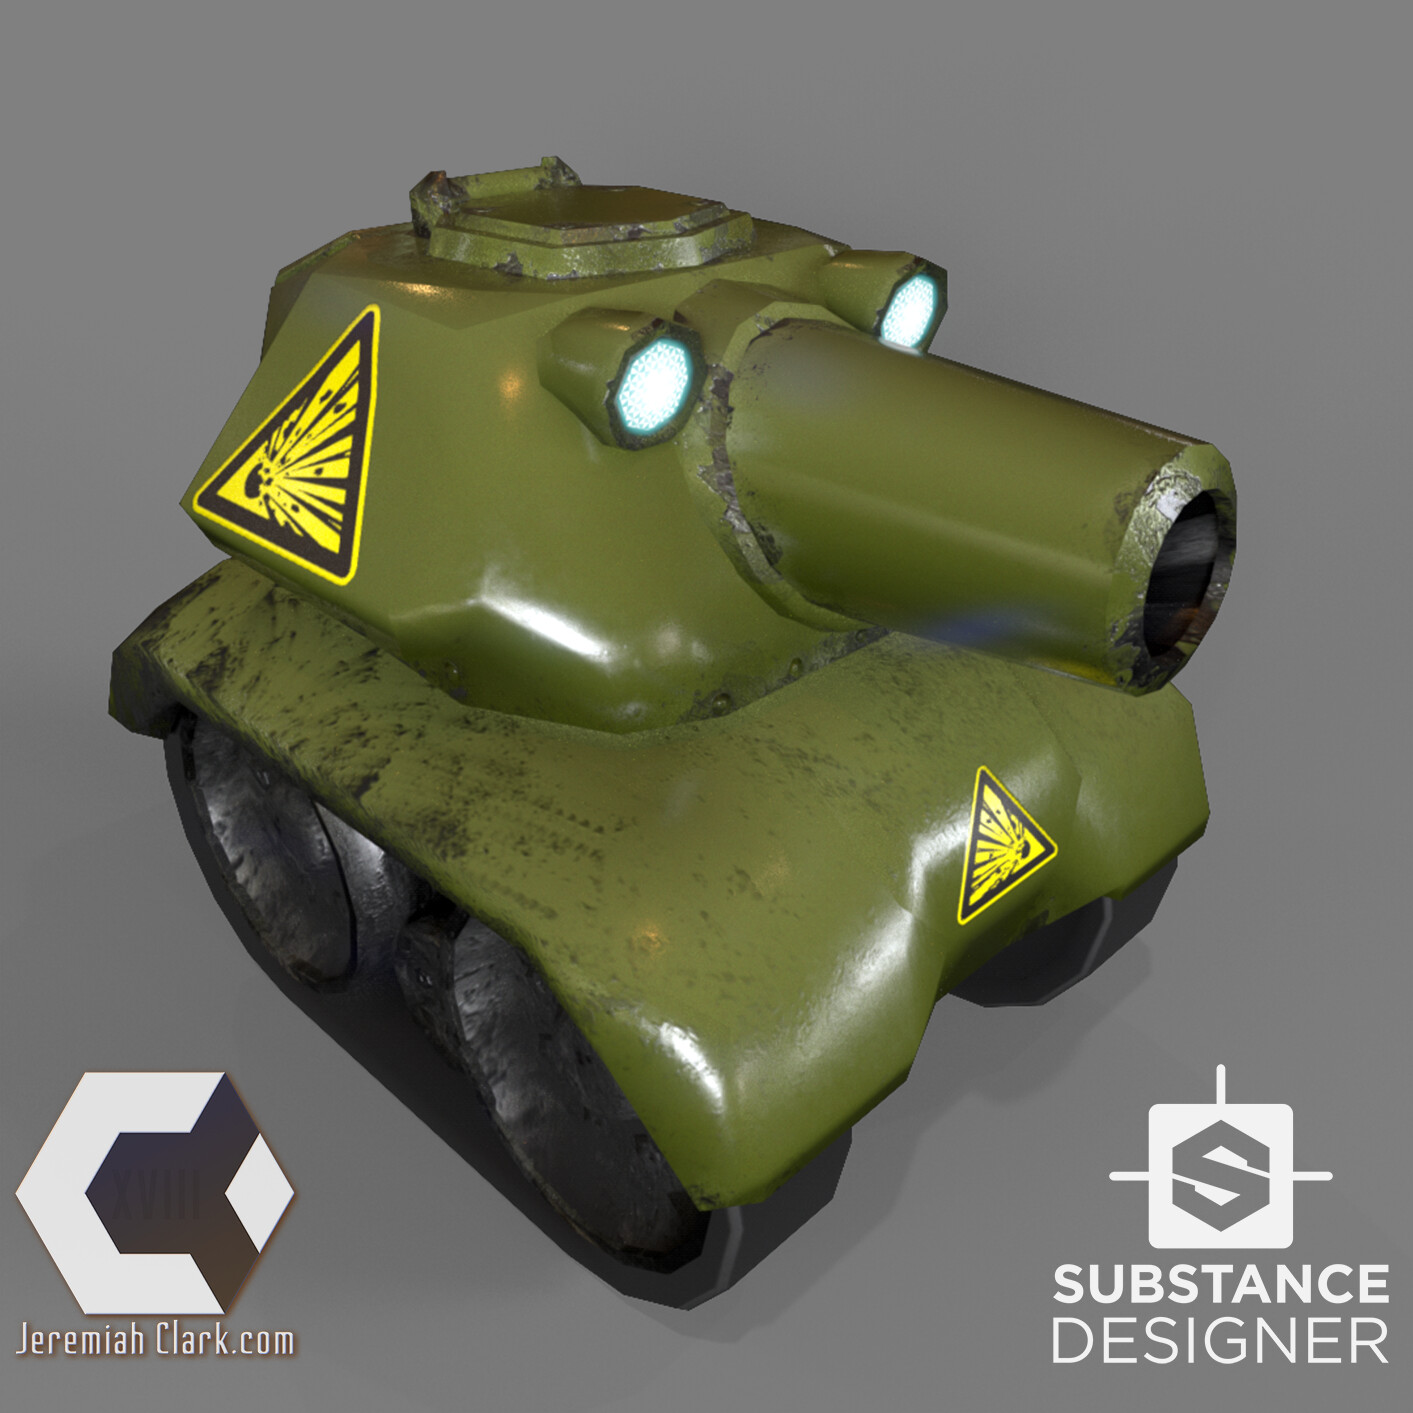 I picked a tank that was as far from the first as possible to test the texture. The same substance works with minimal adjustment.

Mesh optimized and UVed in Modo.
Textured using Substance Designer.
Rendered using IRay in Substance Desi